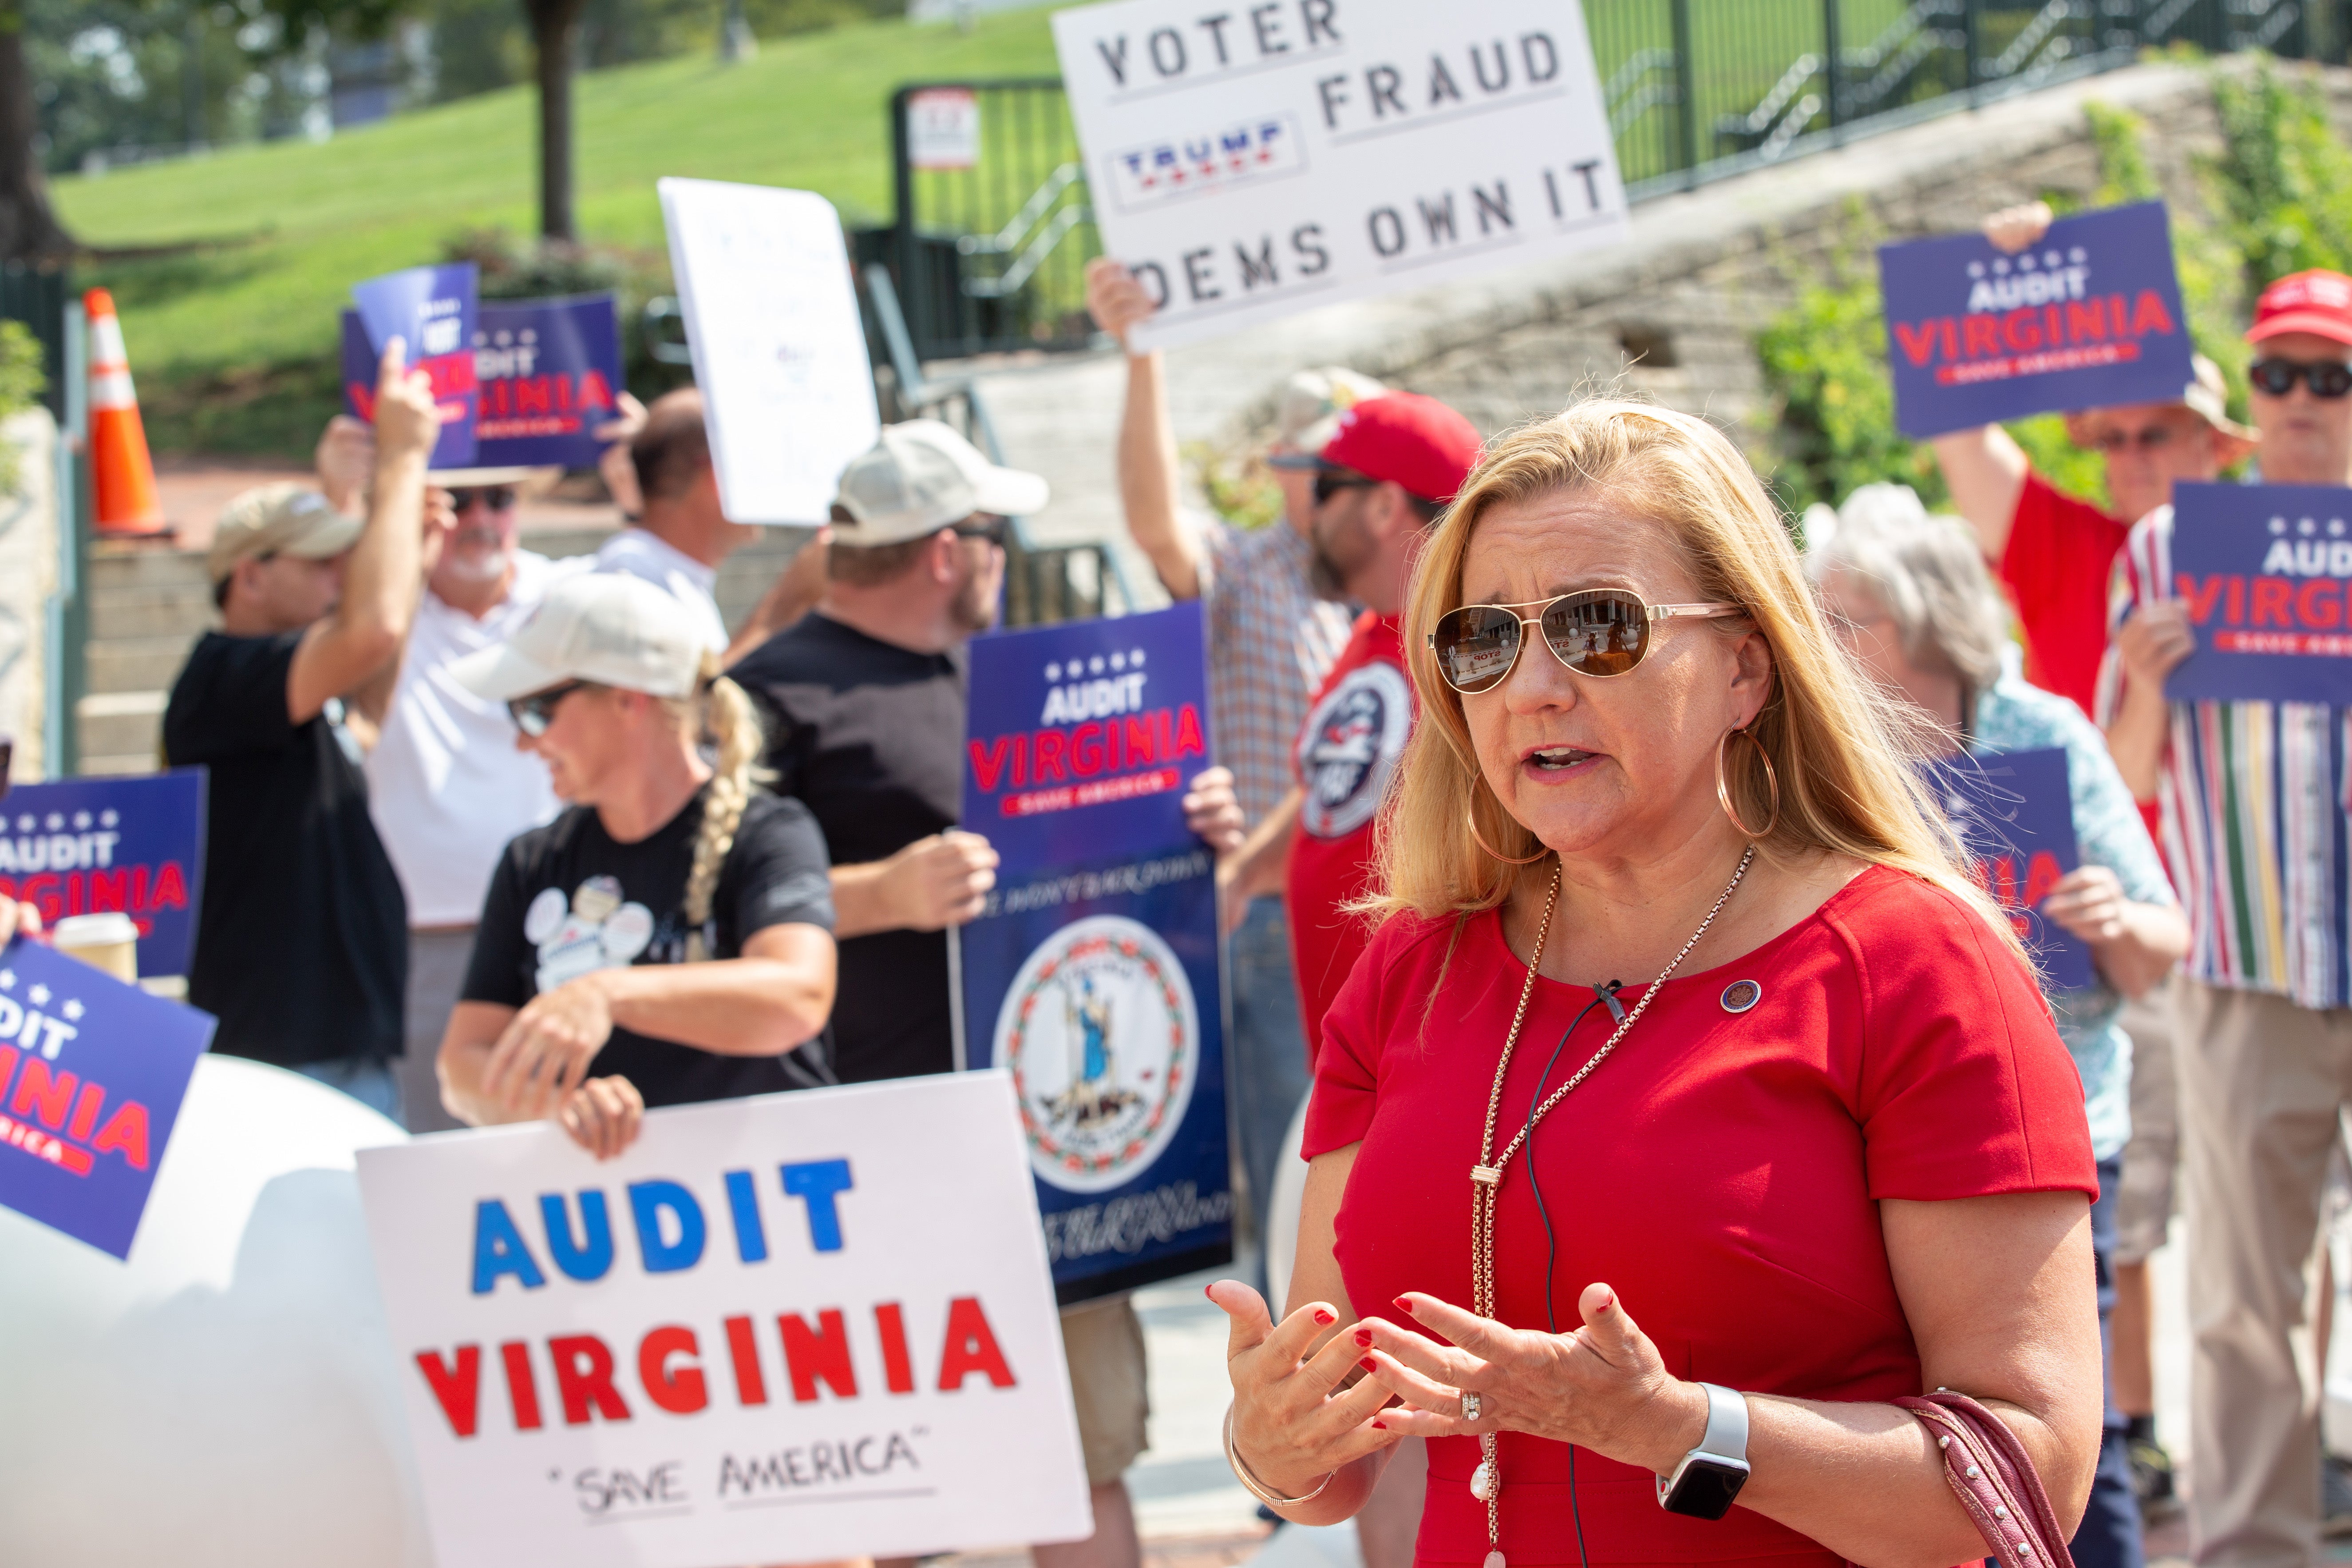 State Sen. Amanda Chase, R-Chesterfield, right, takes part in an August demonstration in Richmond calling for an audit of the 2020 general election in Virginia